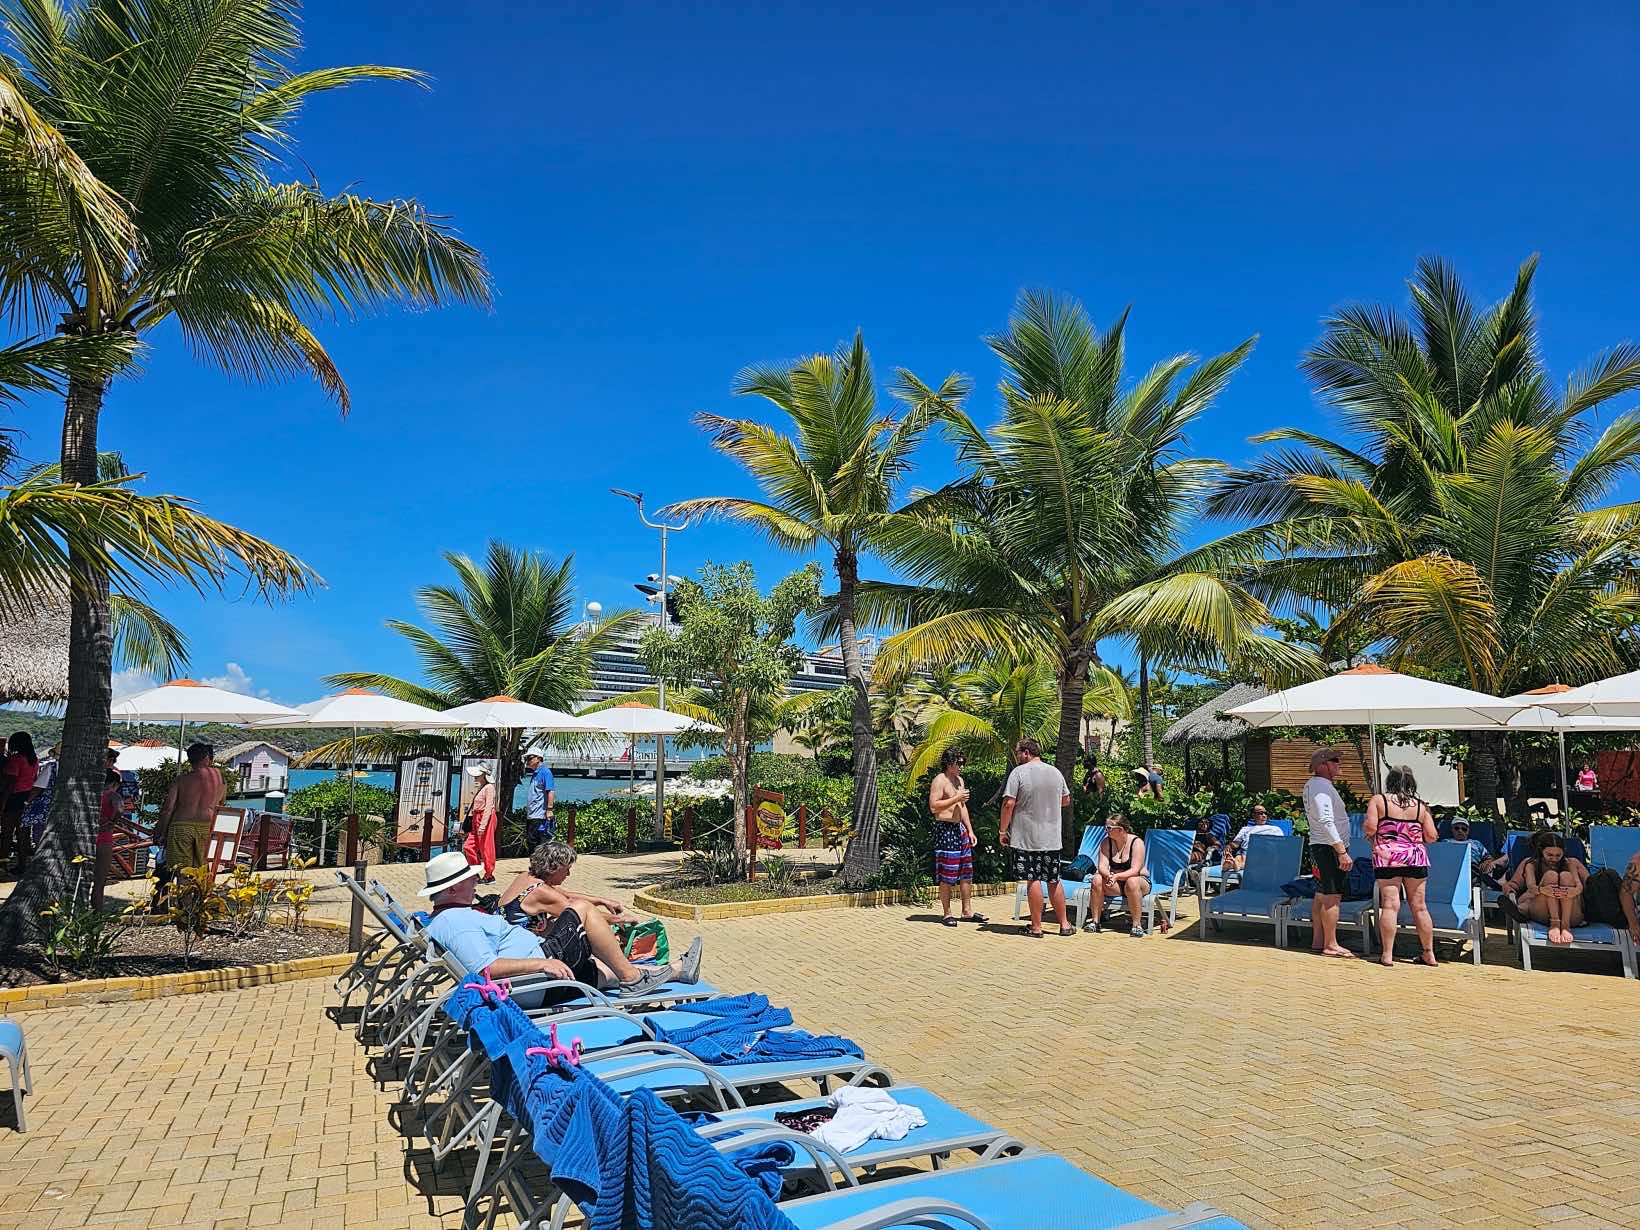 The pool at Amber Cove port is one of the Amber Cove free activities.